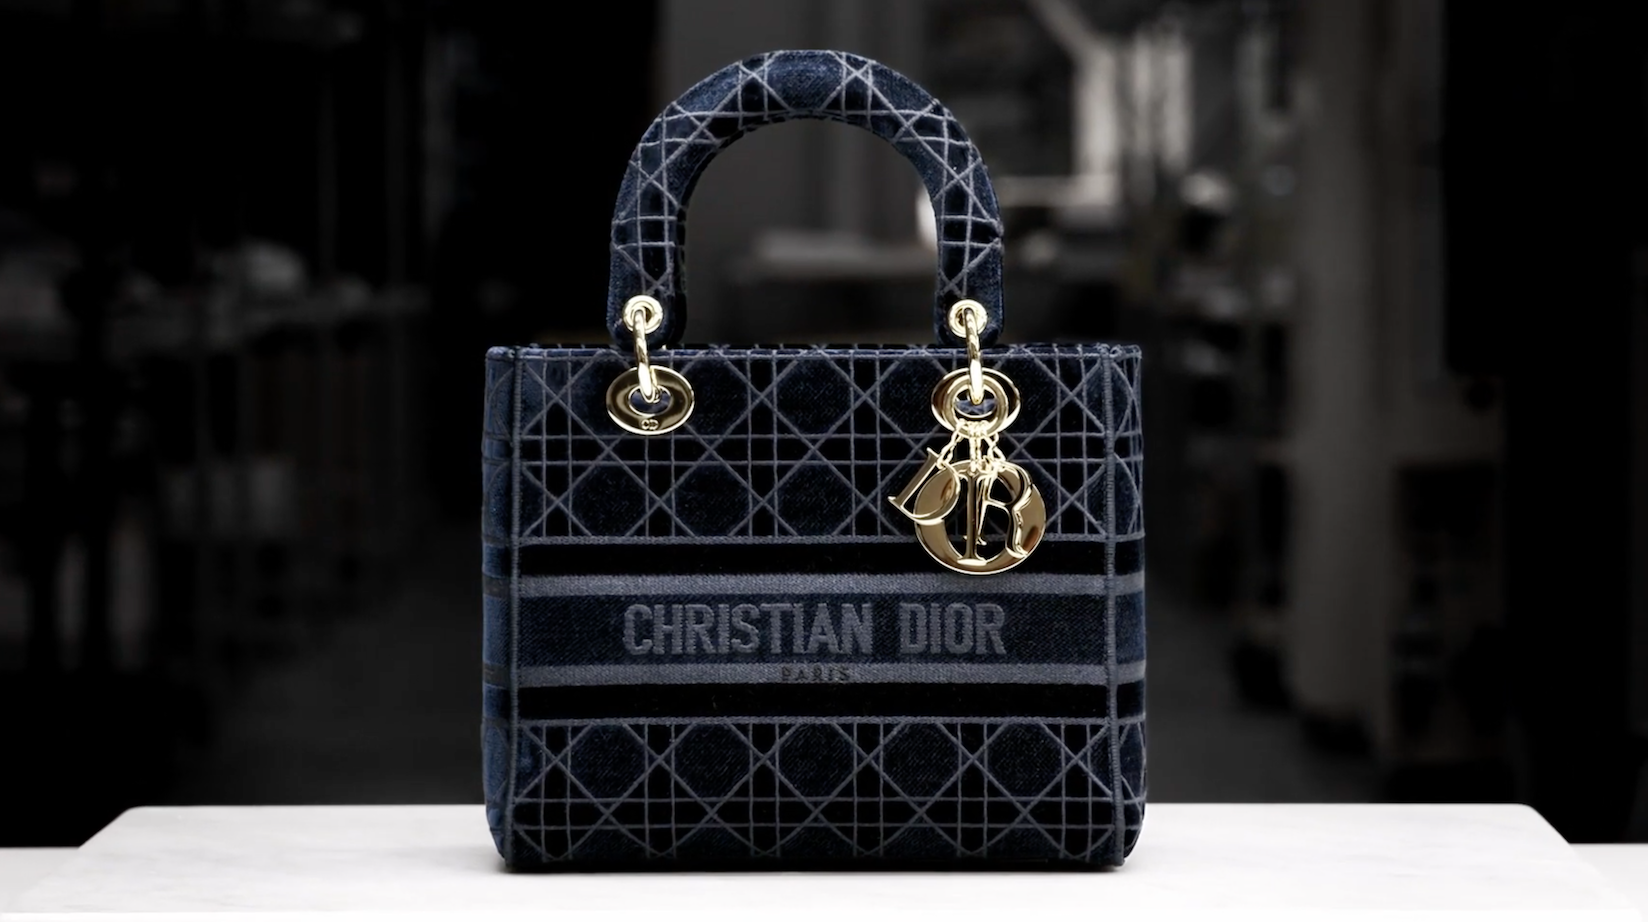 THE DIOR LADYD BAG NOW AVAILABLE IN VELVET • MVC Magazine